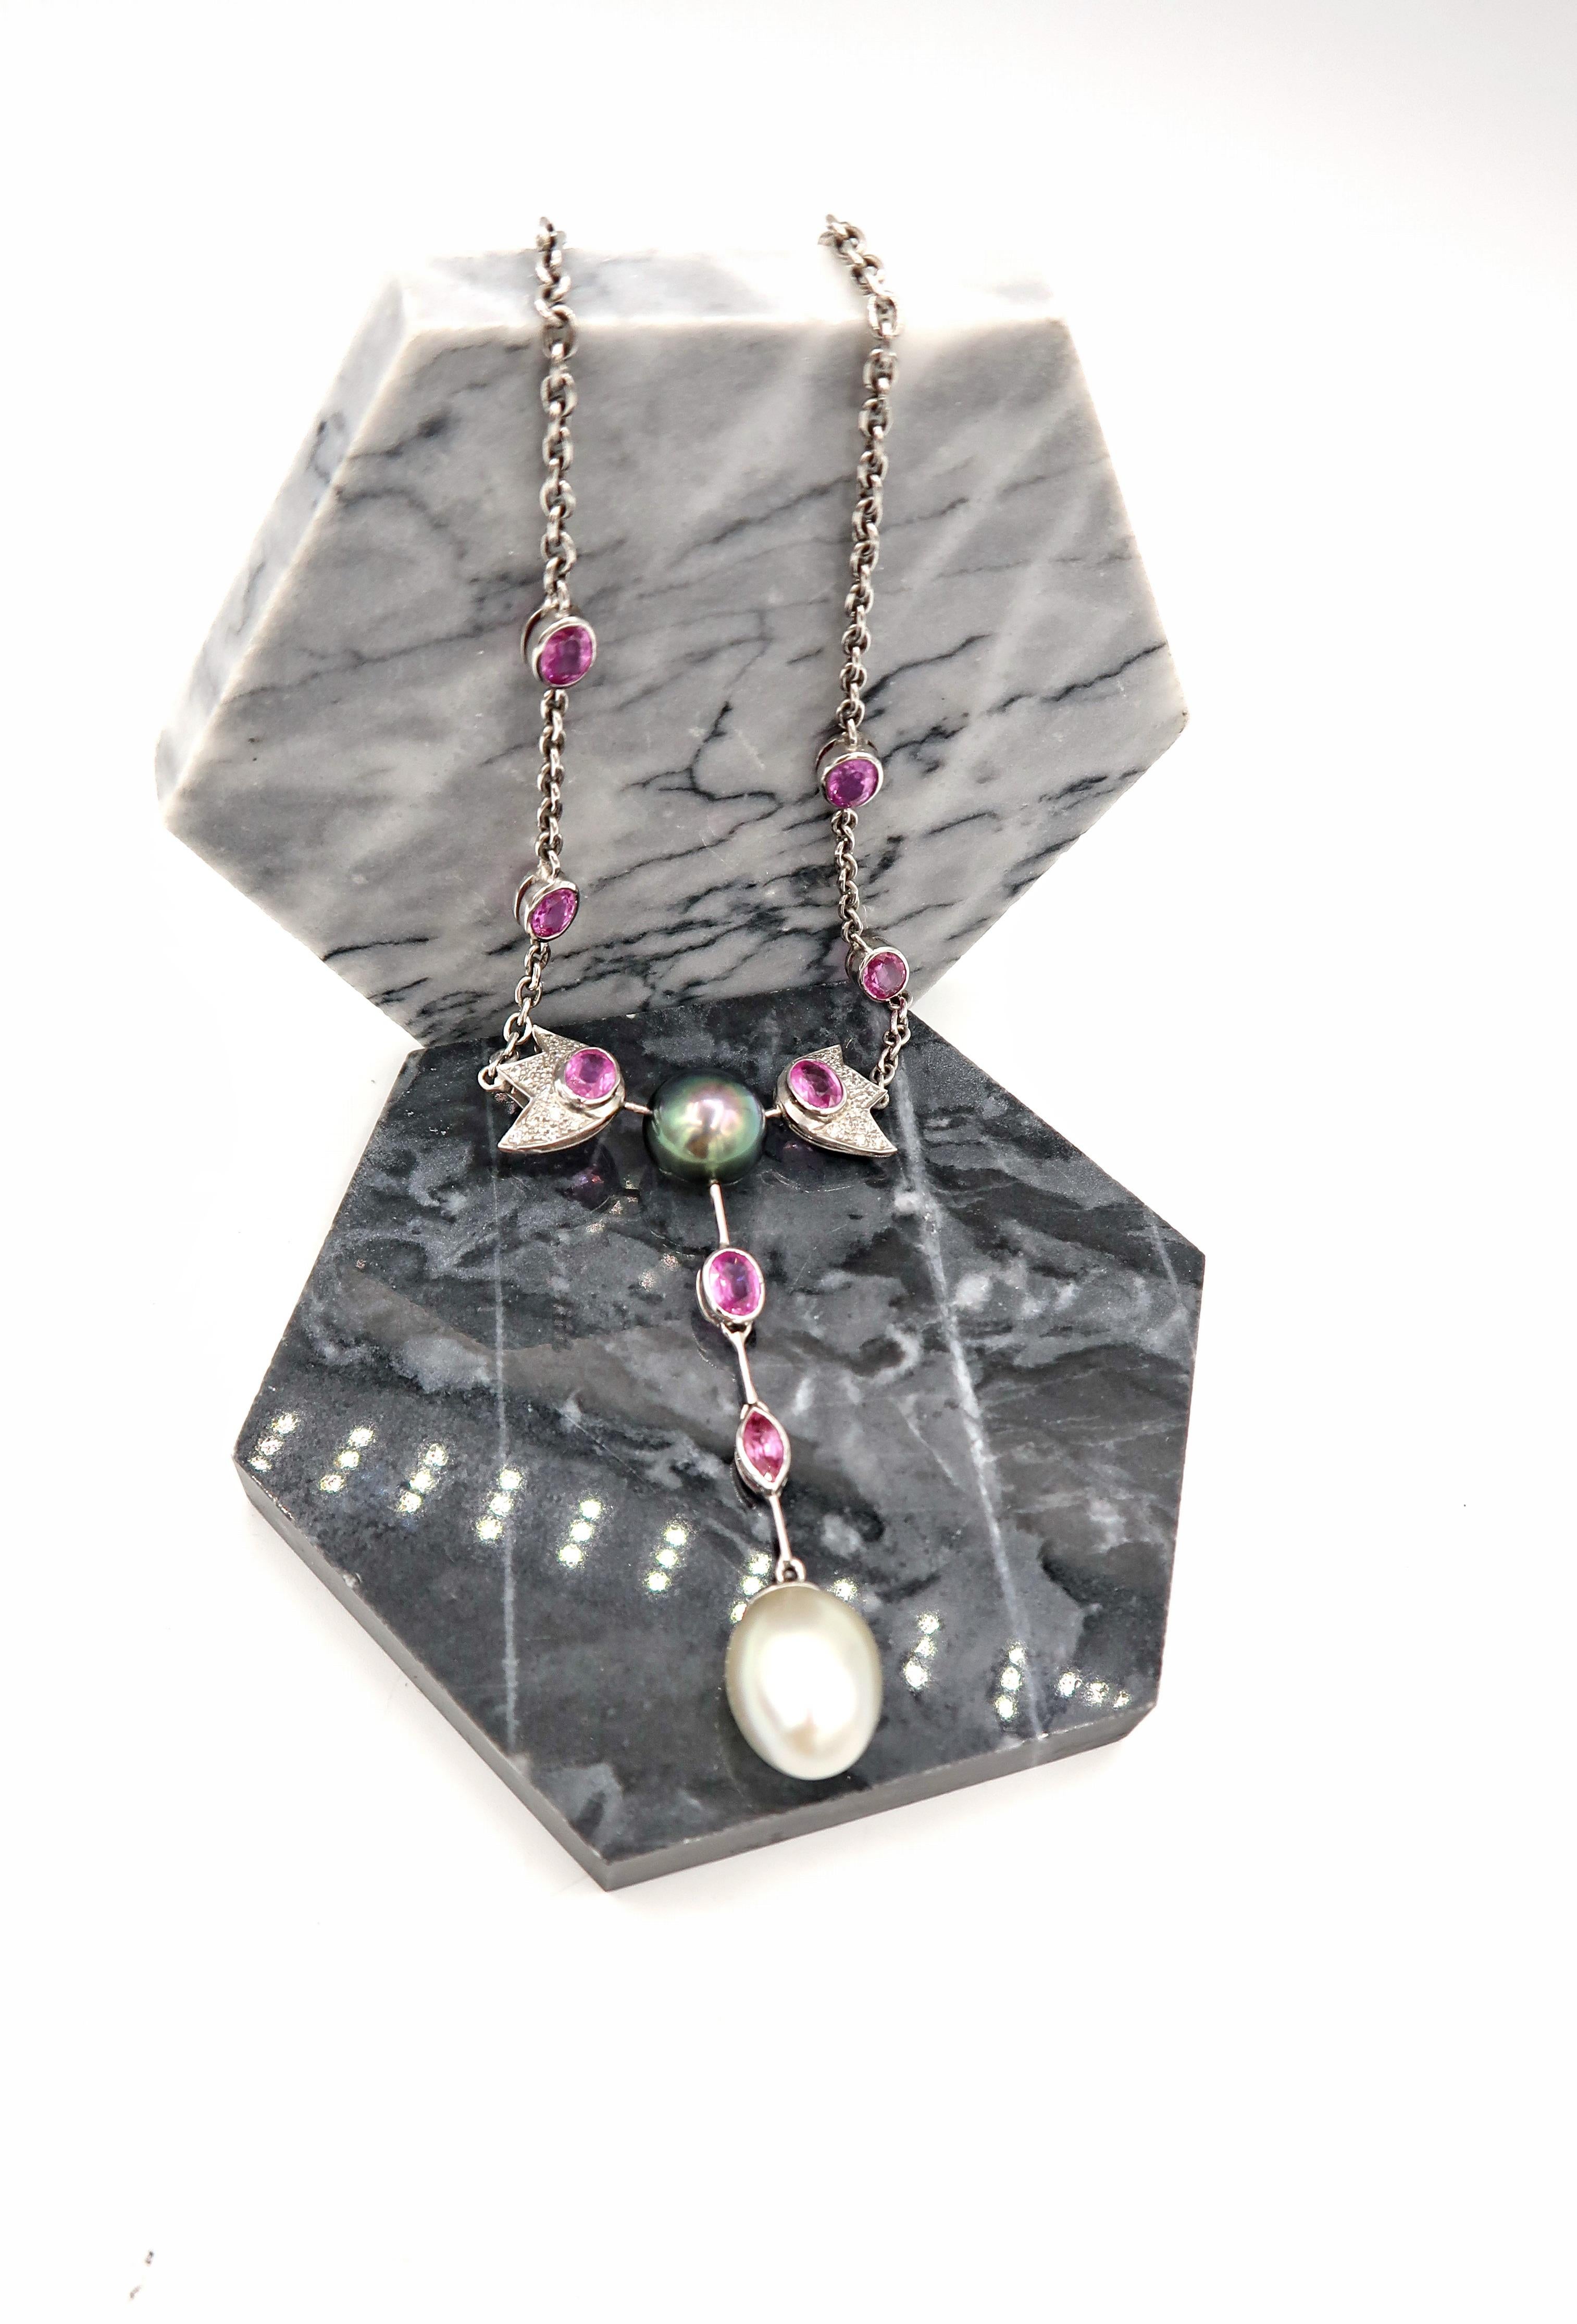 Tahitian Pearl, Pink Sapphire, and Diamond Pavé Chain Necklace with White South Sea Pearl Drop

Gold: 18K 29.89g.
Diamond: 1.20ct.
Pink Sapphire: 10.75cts.
Tahitian Pearl: 11.5 mm x 11.5 mm
White South Sea Pearl: 13.5mm x 16.5mm